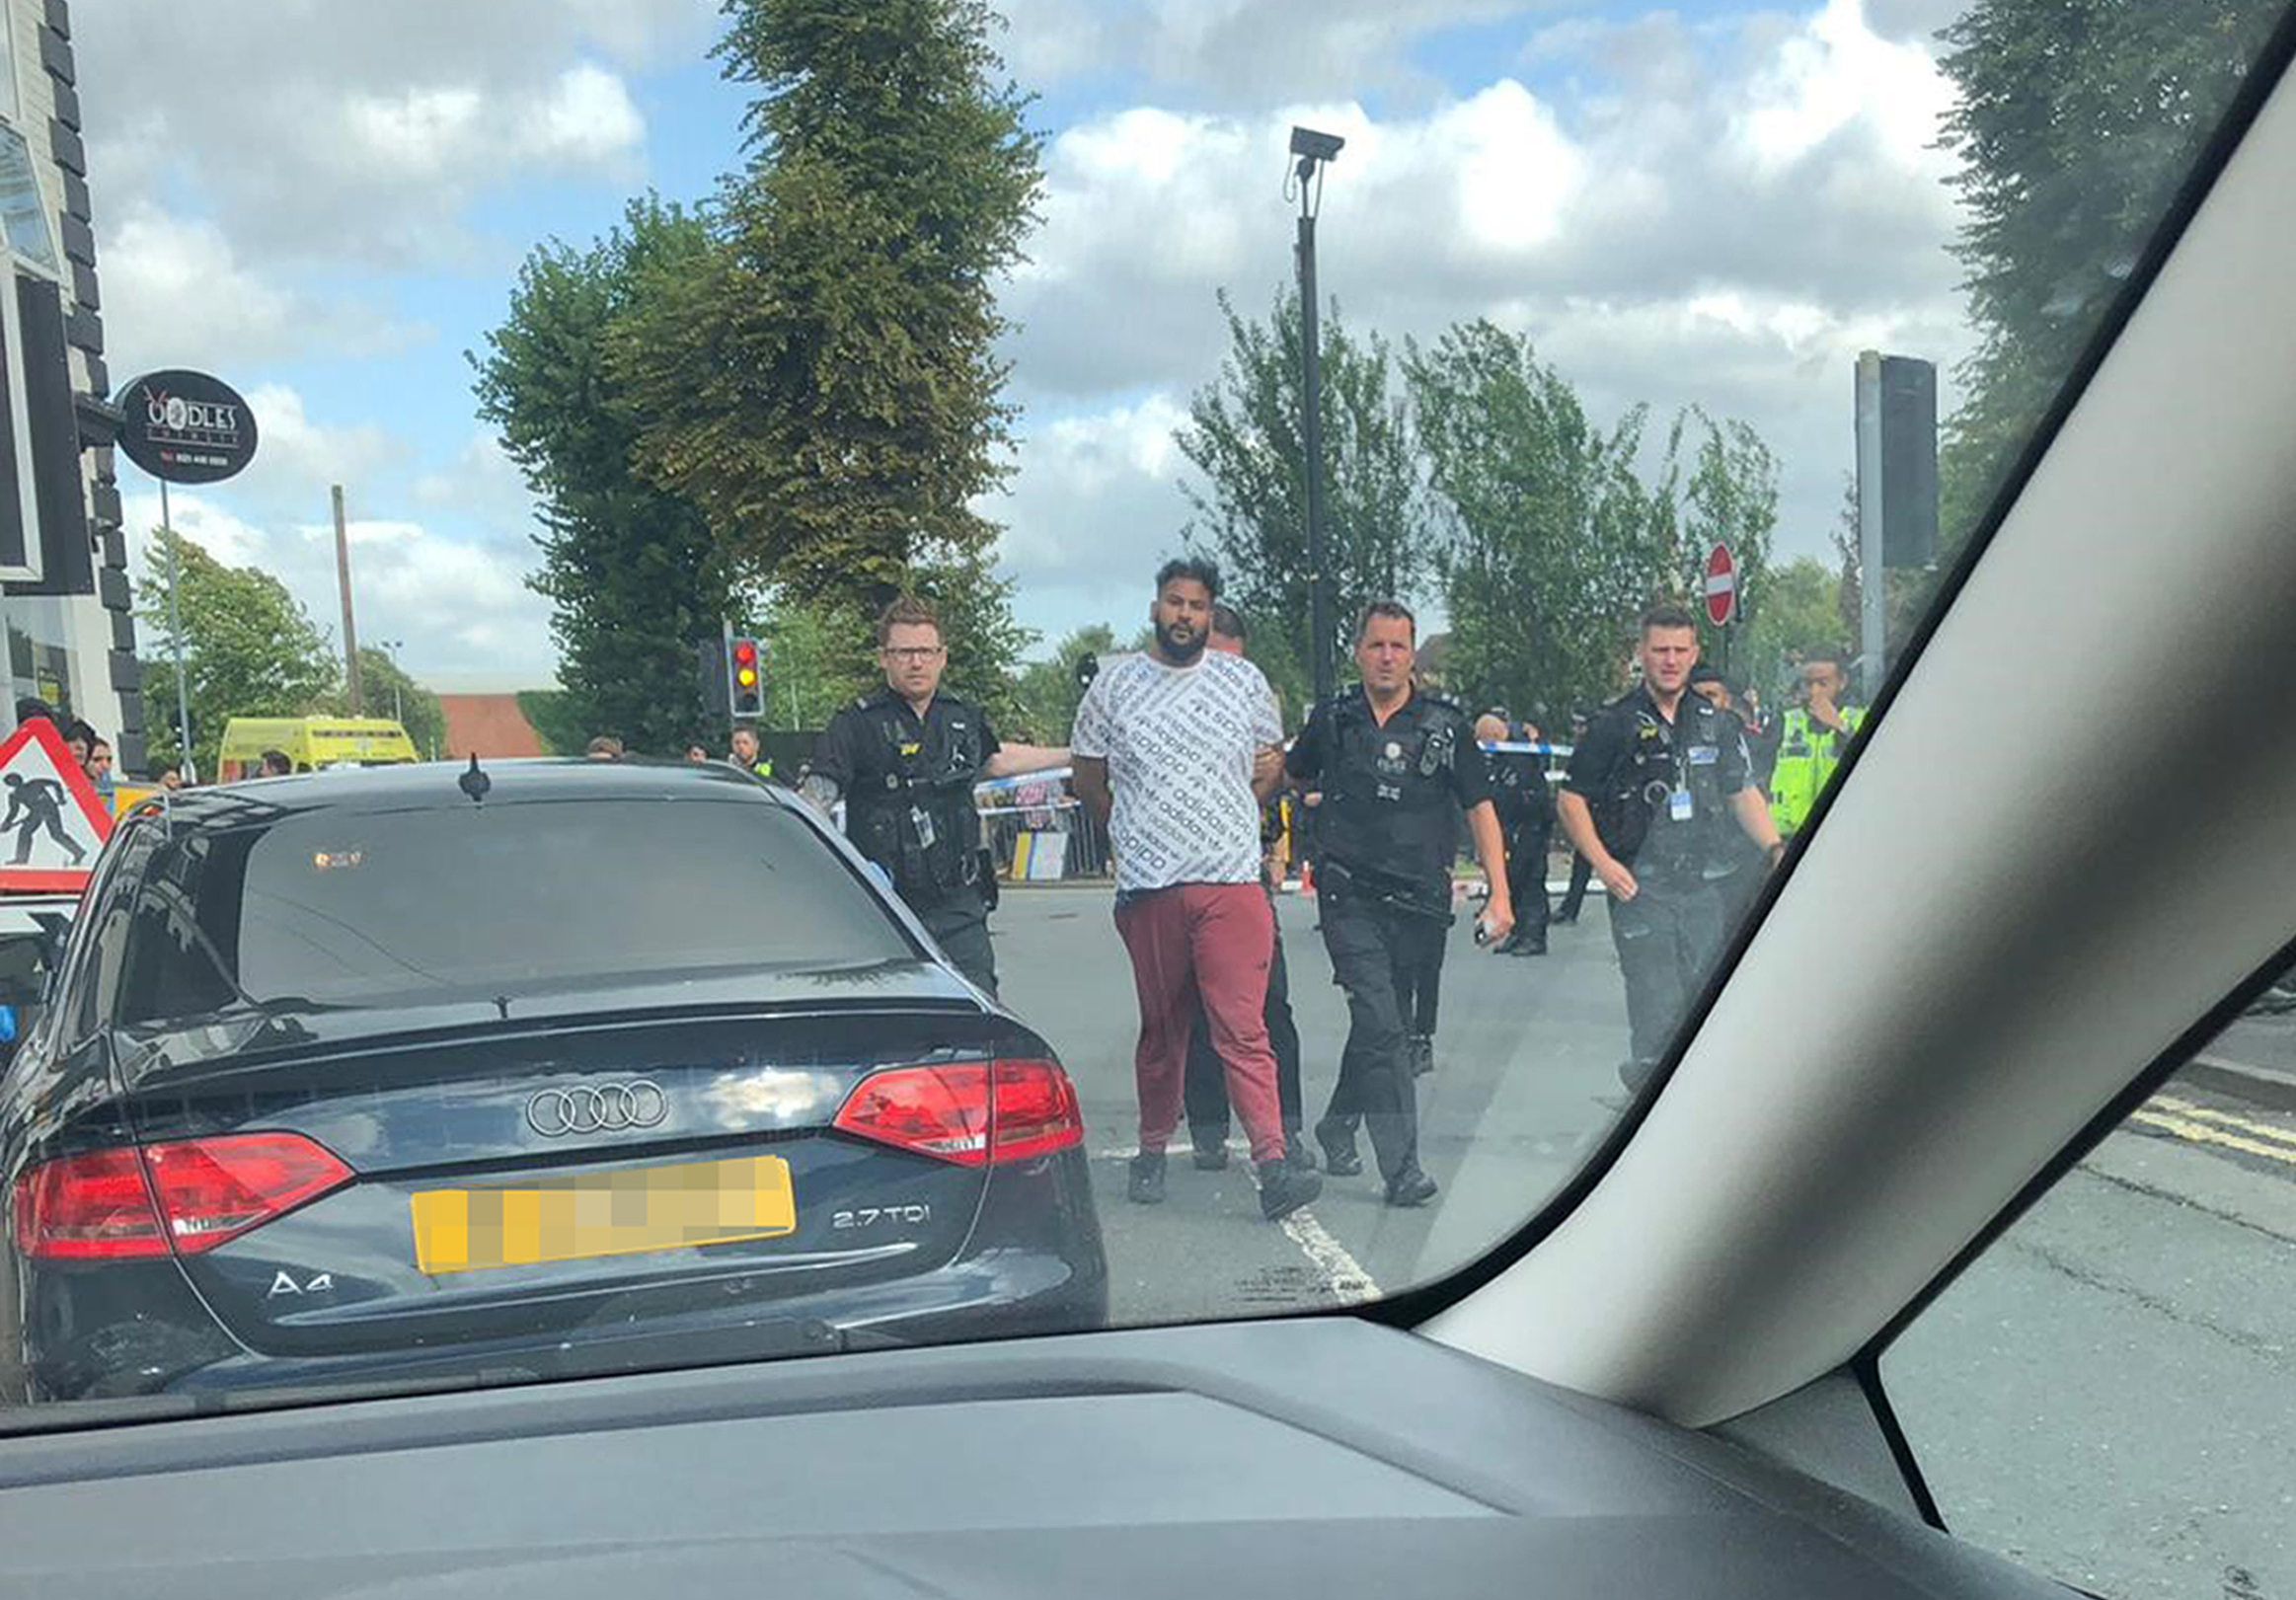 A man being detained by police after an incident in Moorcroft Road, Moseley, Birmingham, where a police officer has been seriously injured after being run over by a suspected car thief. (Sohail Razaque/PA)